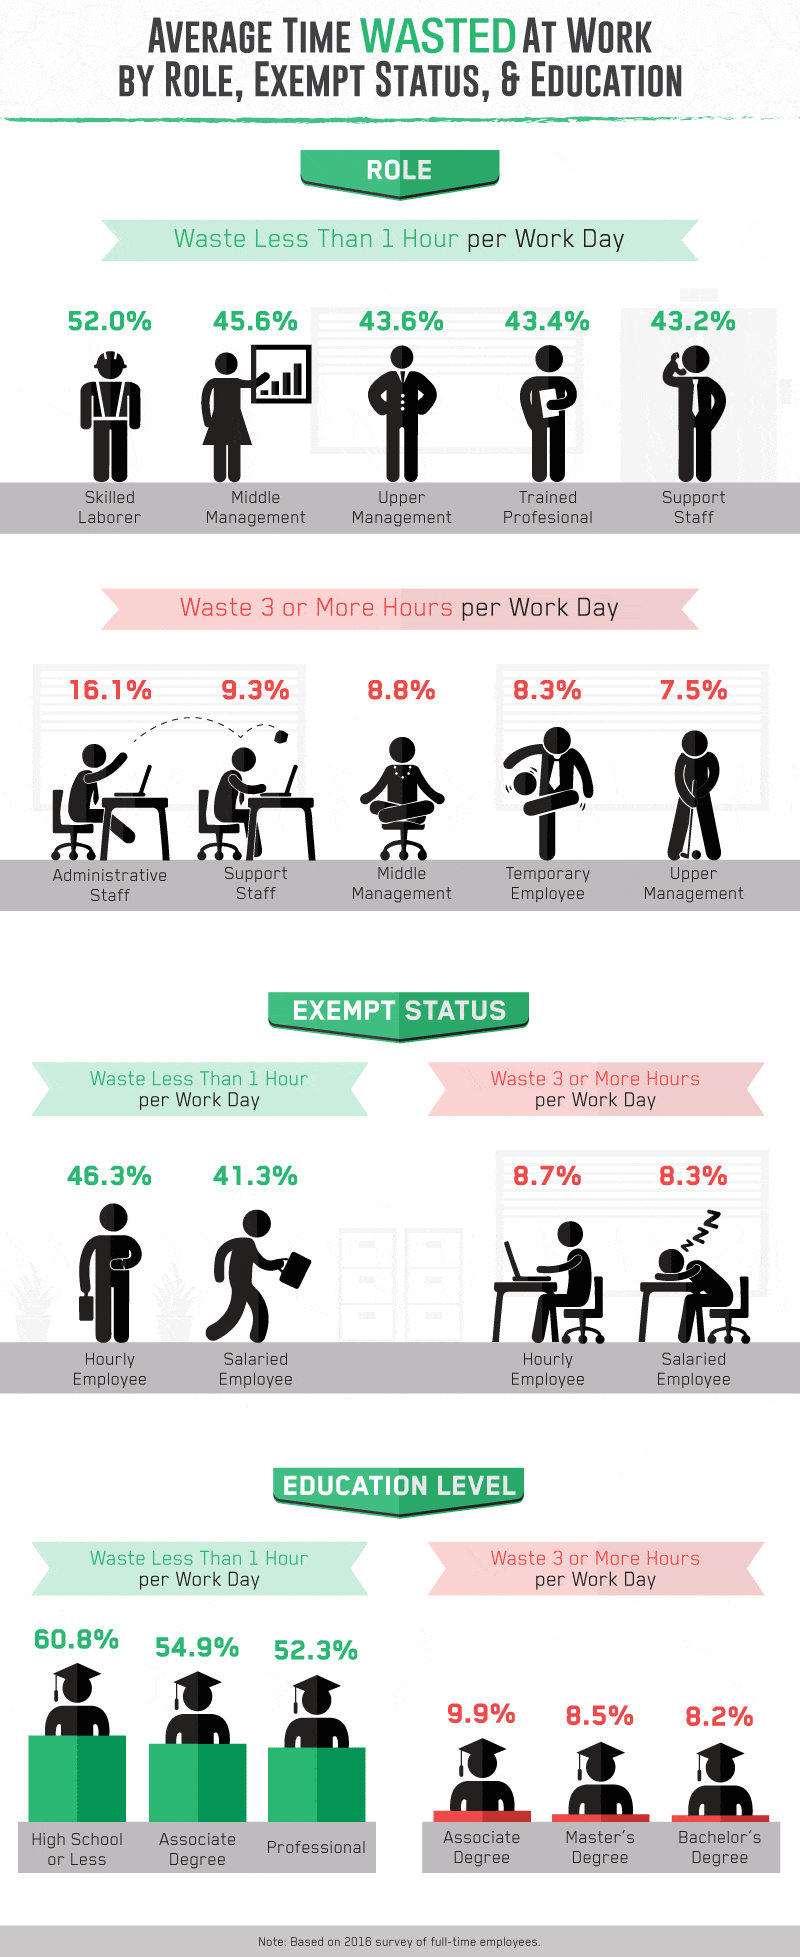 average time wasted at work by role, exempt status & education